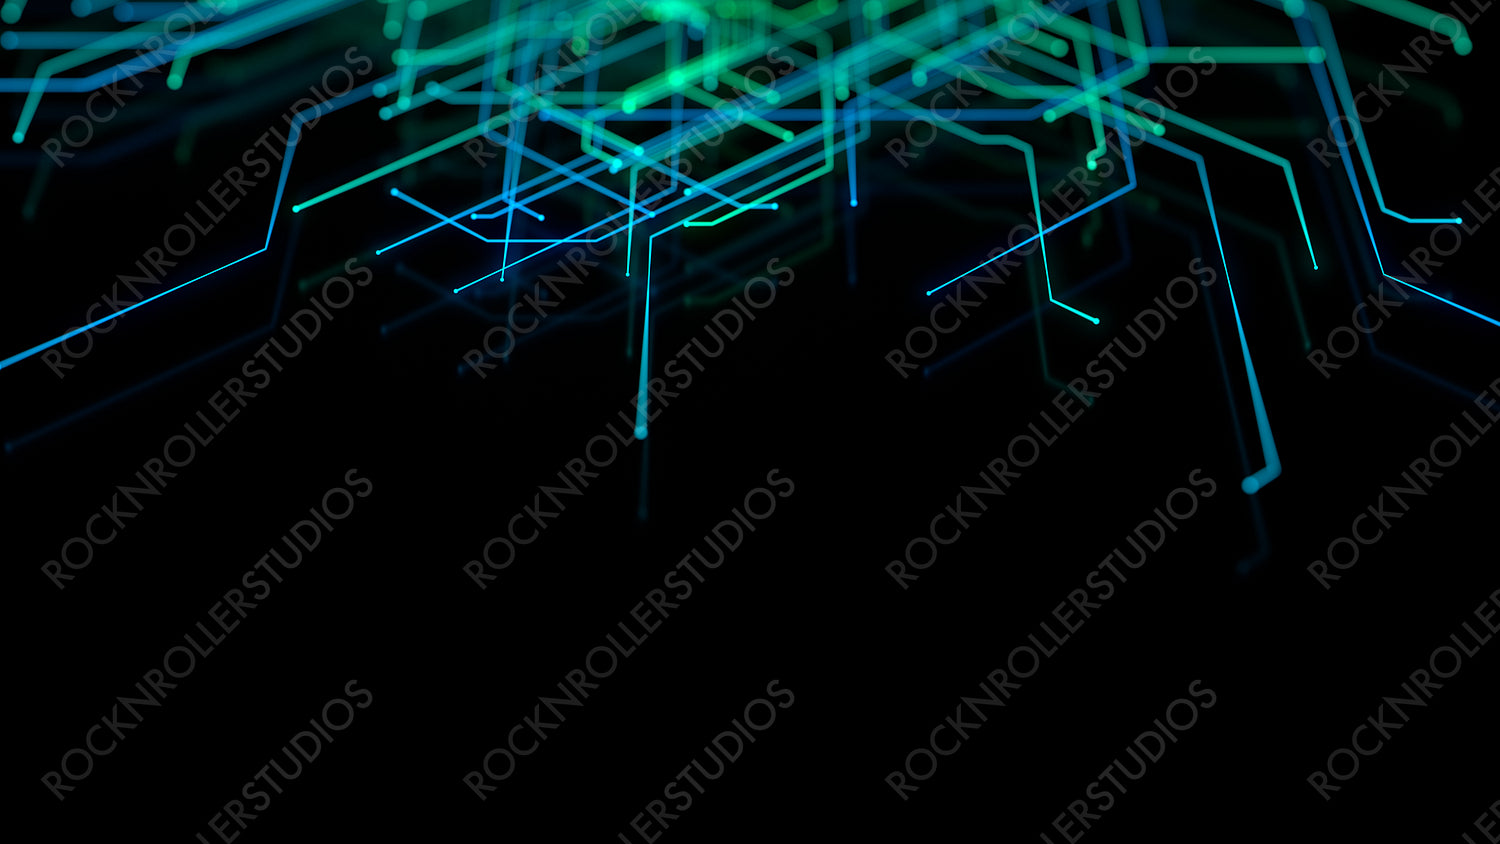 Blue and Green Cyberspace Concept with Technical Structure. Futuristic Neon Lines with copy-space.